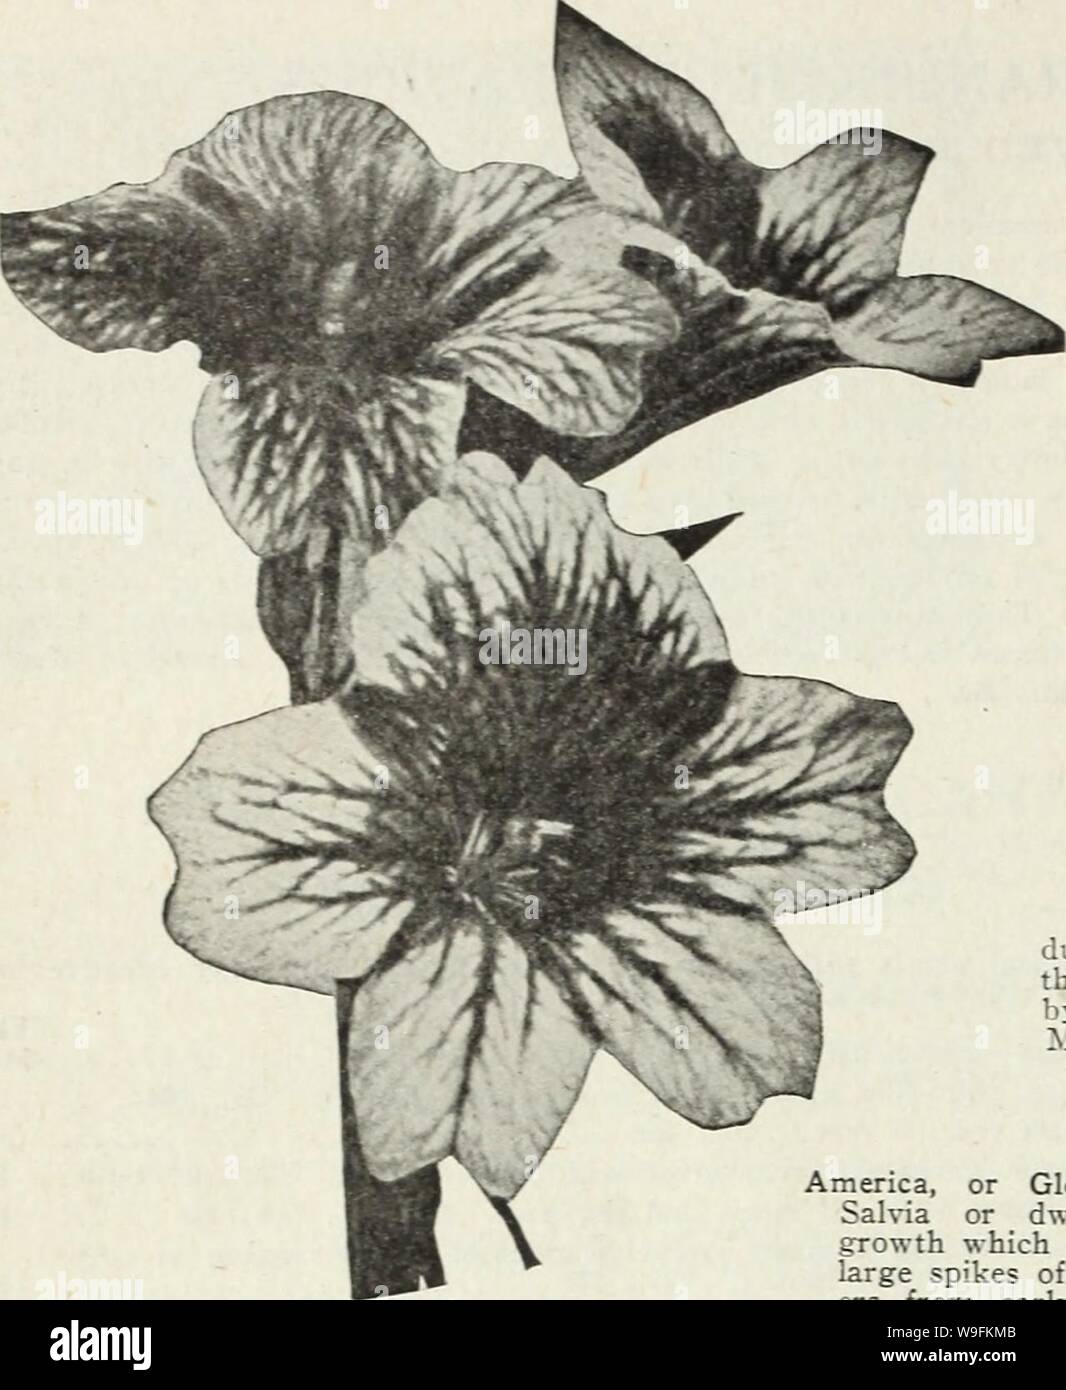 Archive image from page 51 of Currie's farm and garden annual. Currie's farm and garden annual : spring 1930  curriesfarmgarde19curr Year: 1930 ( SALPIGLOSSIS (PAINTED TONGUE) This is undoubtedly oue of the most attractive annuals and should be in every garden. The blossoms are tube-shaped much like a Pe- tunia but rivalling- the latter in the beautiful and unusual range of colors displayed. Each flower is gracefully netted, penciled and veined with golden-yellow and other shades. They bloom profusely during the entire season, and are excellent for cutting. Seed sown outdoors early in spring w Stock Photo